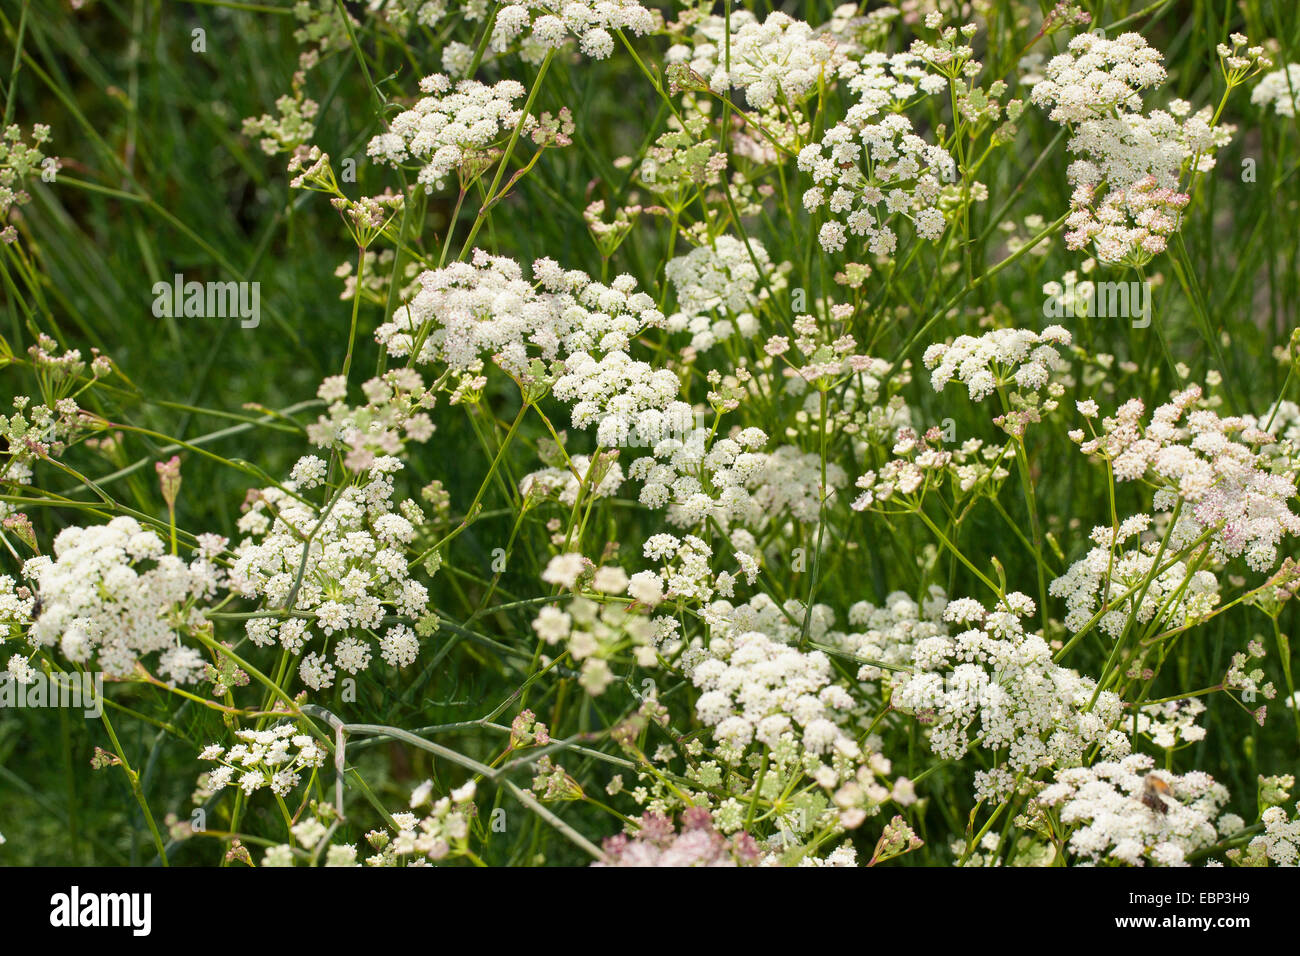 Dissected Moon Carrot (Seseli montanum), blooming, Germany Stock Photo